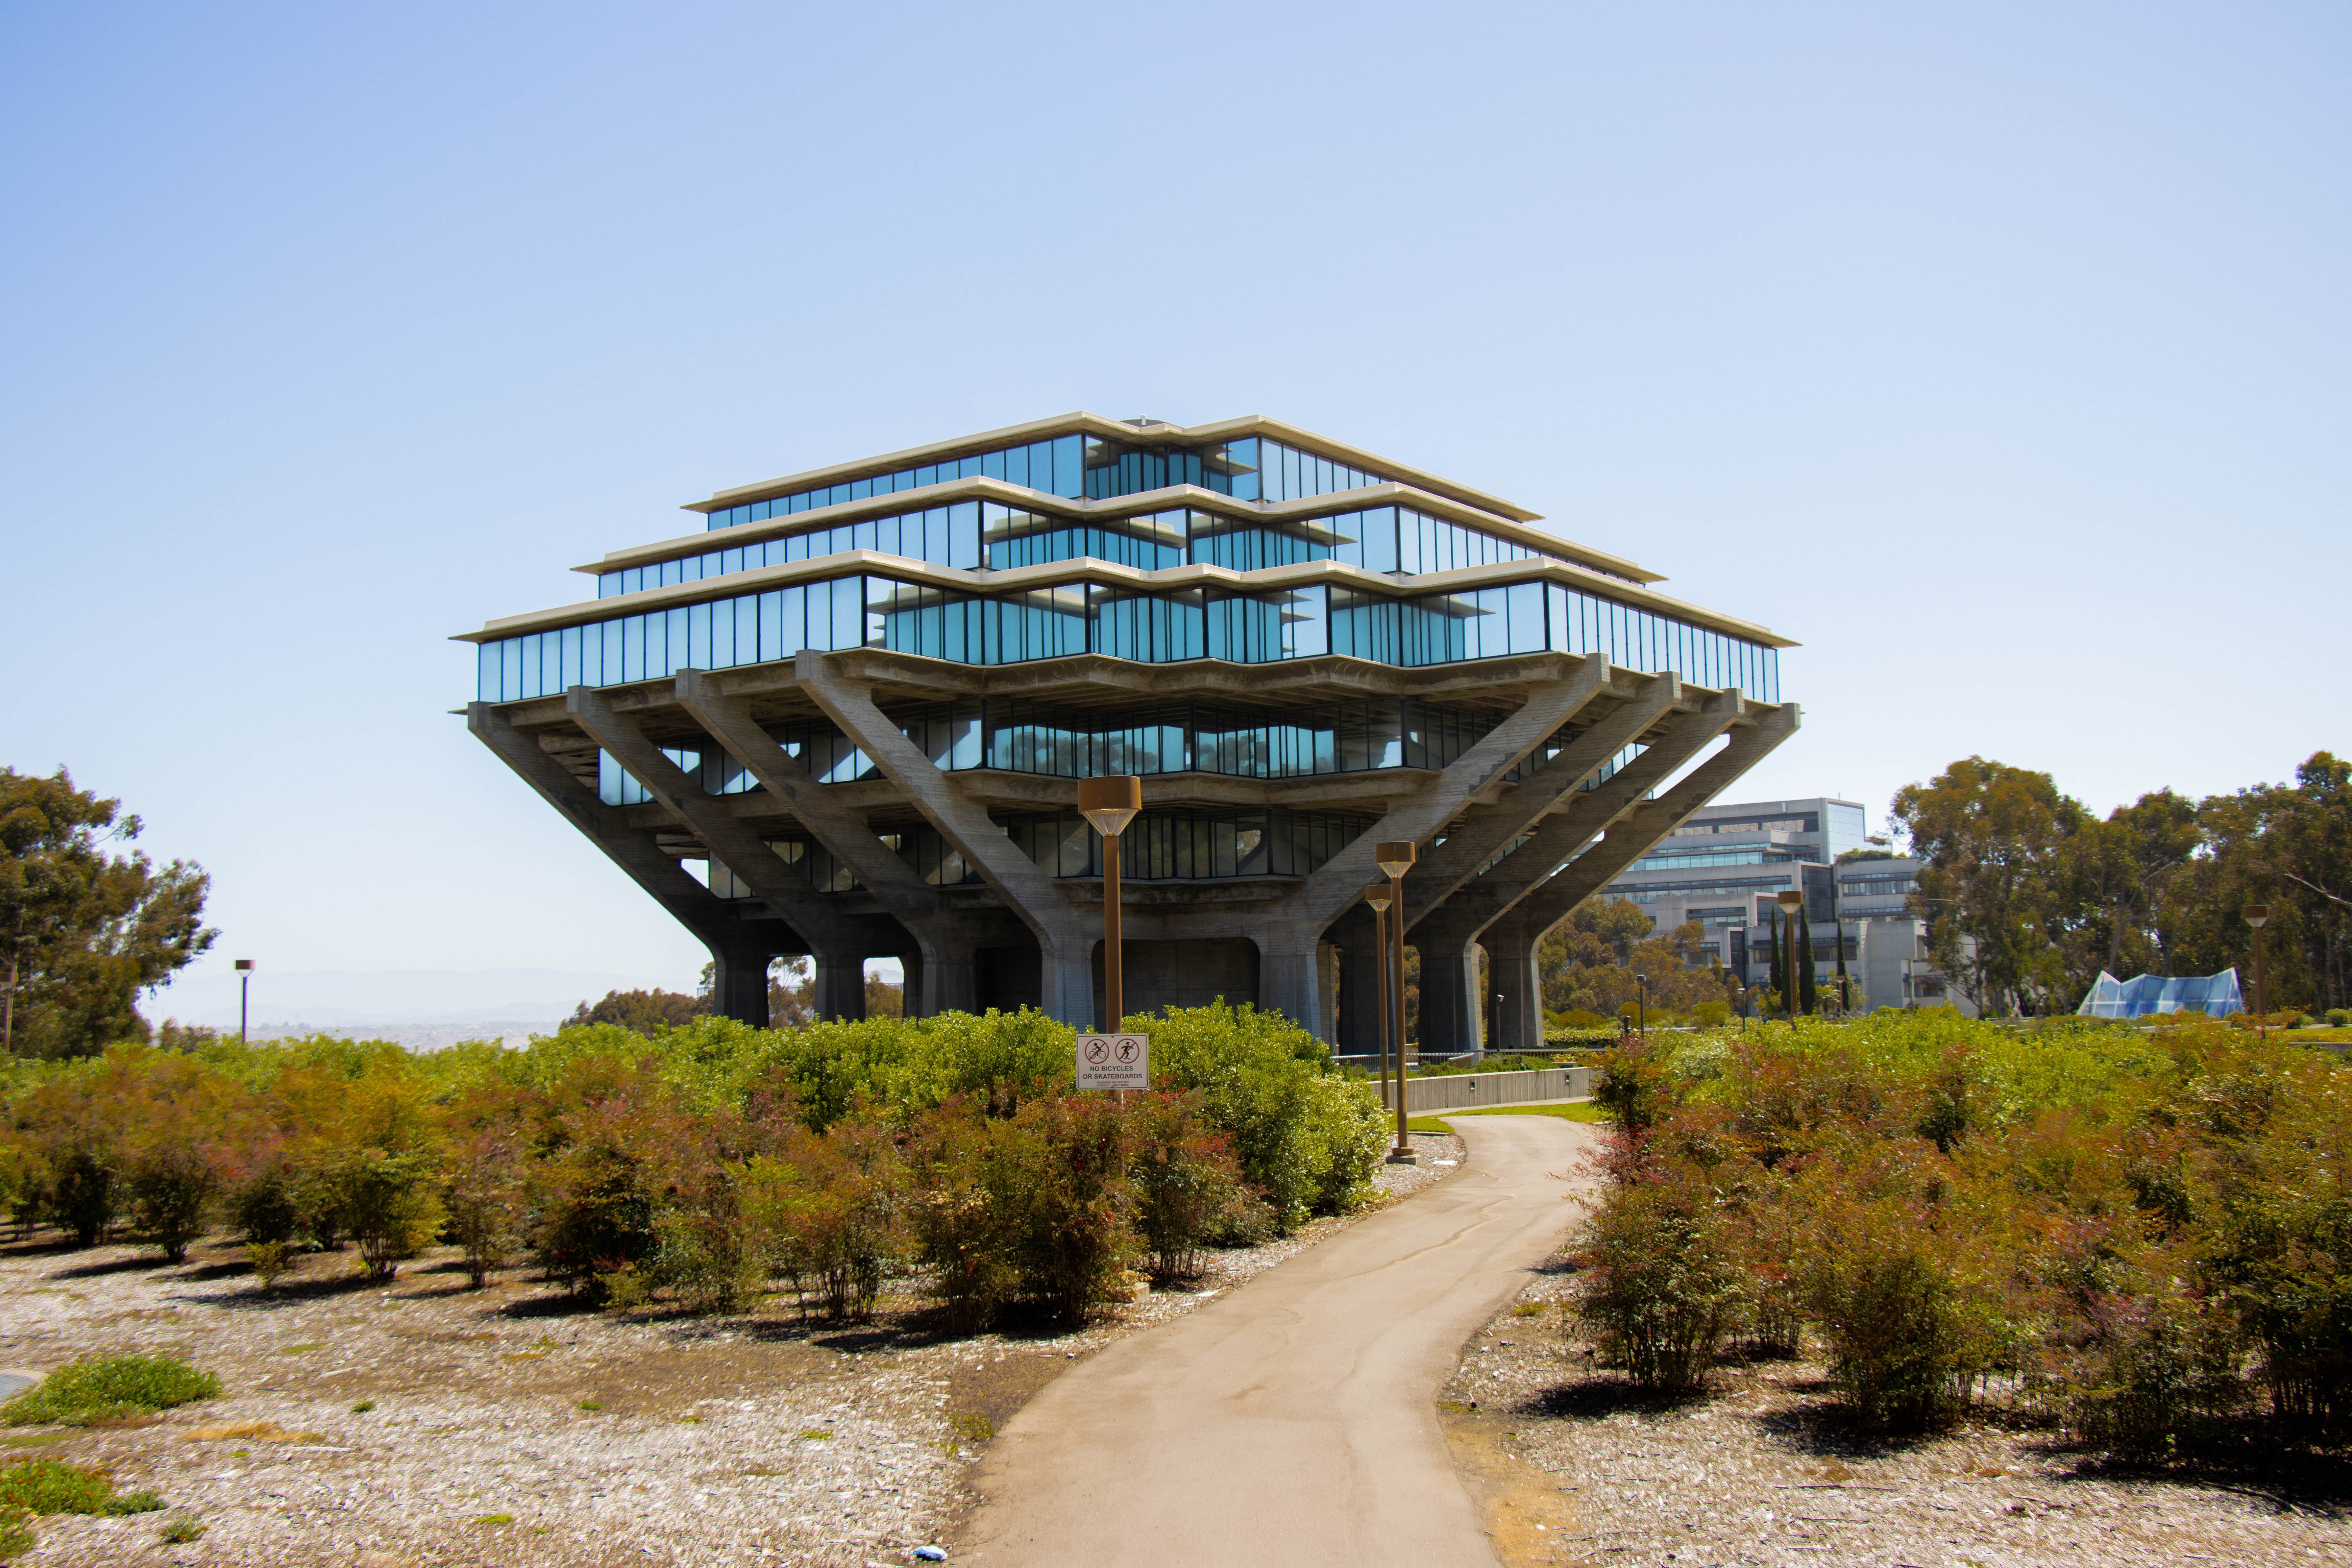 Geisel Library at University of California San Diego